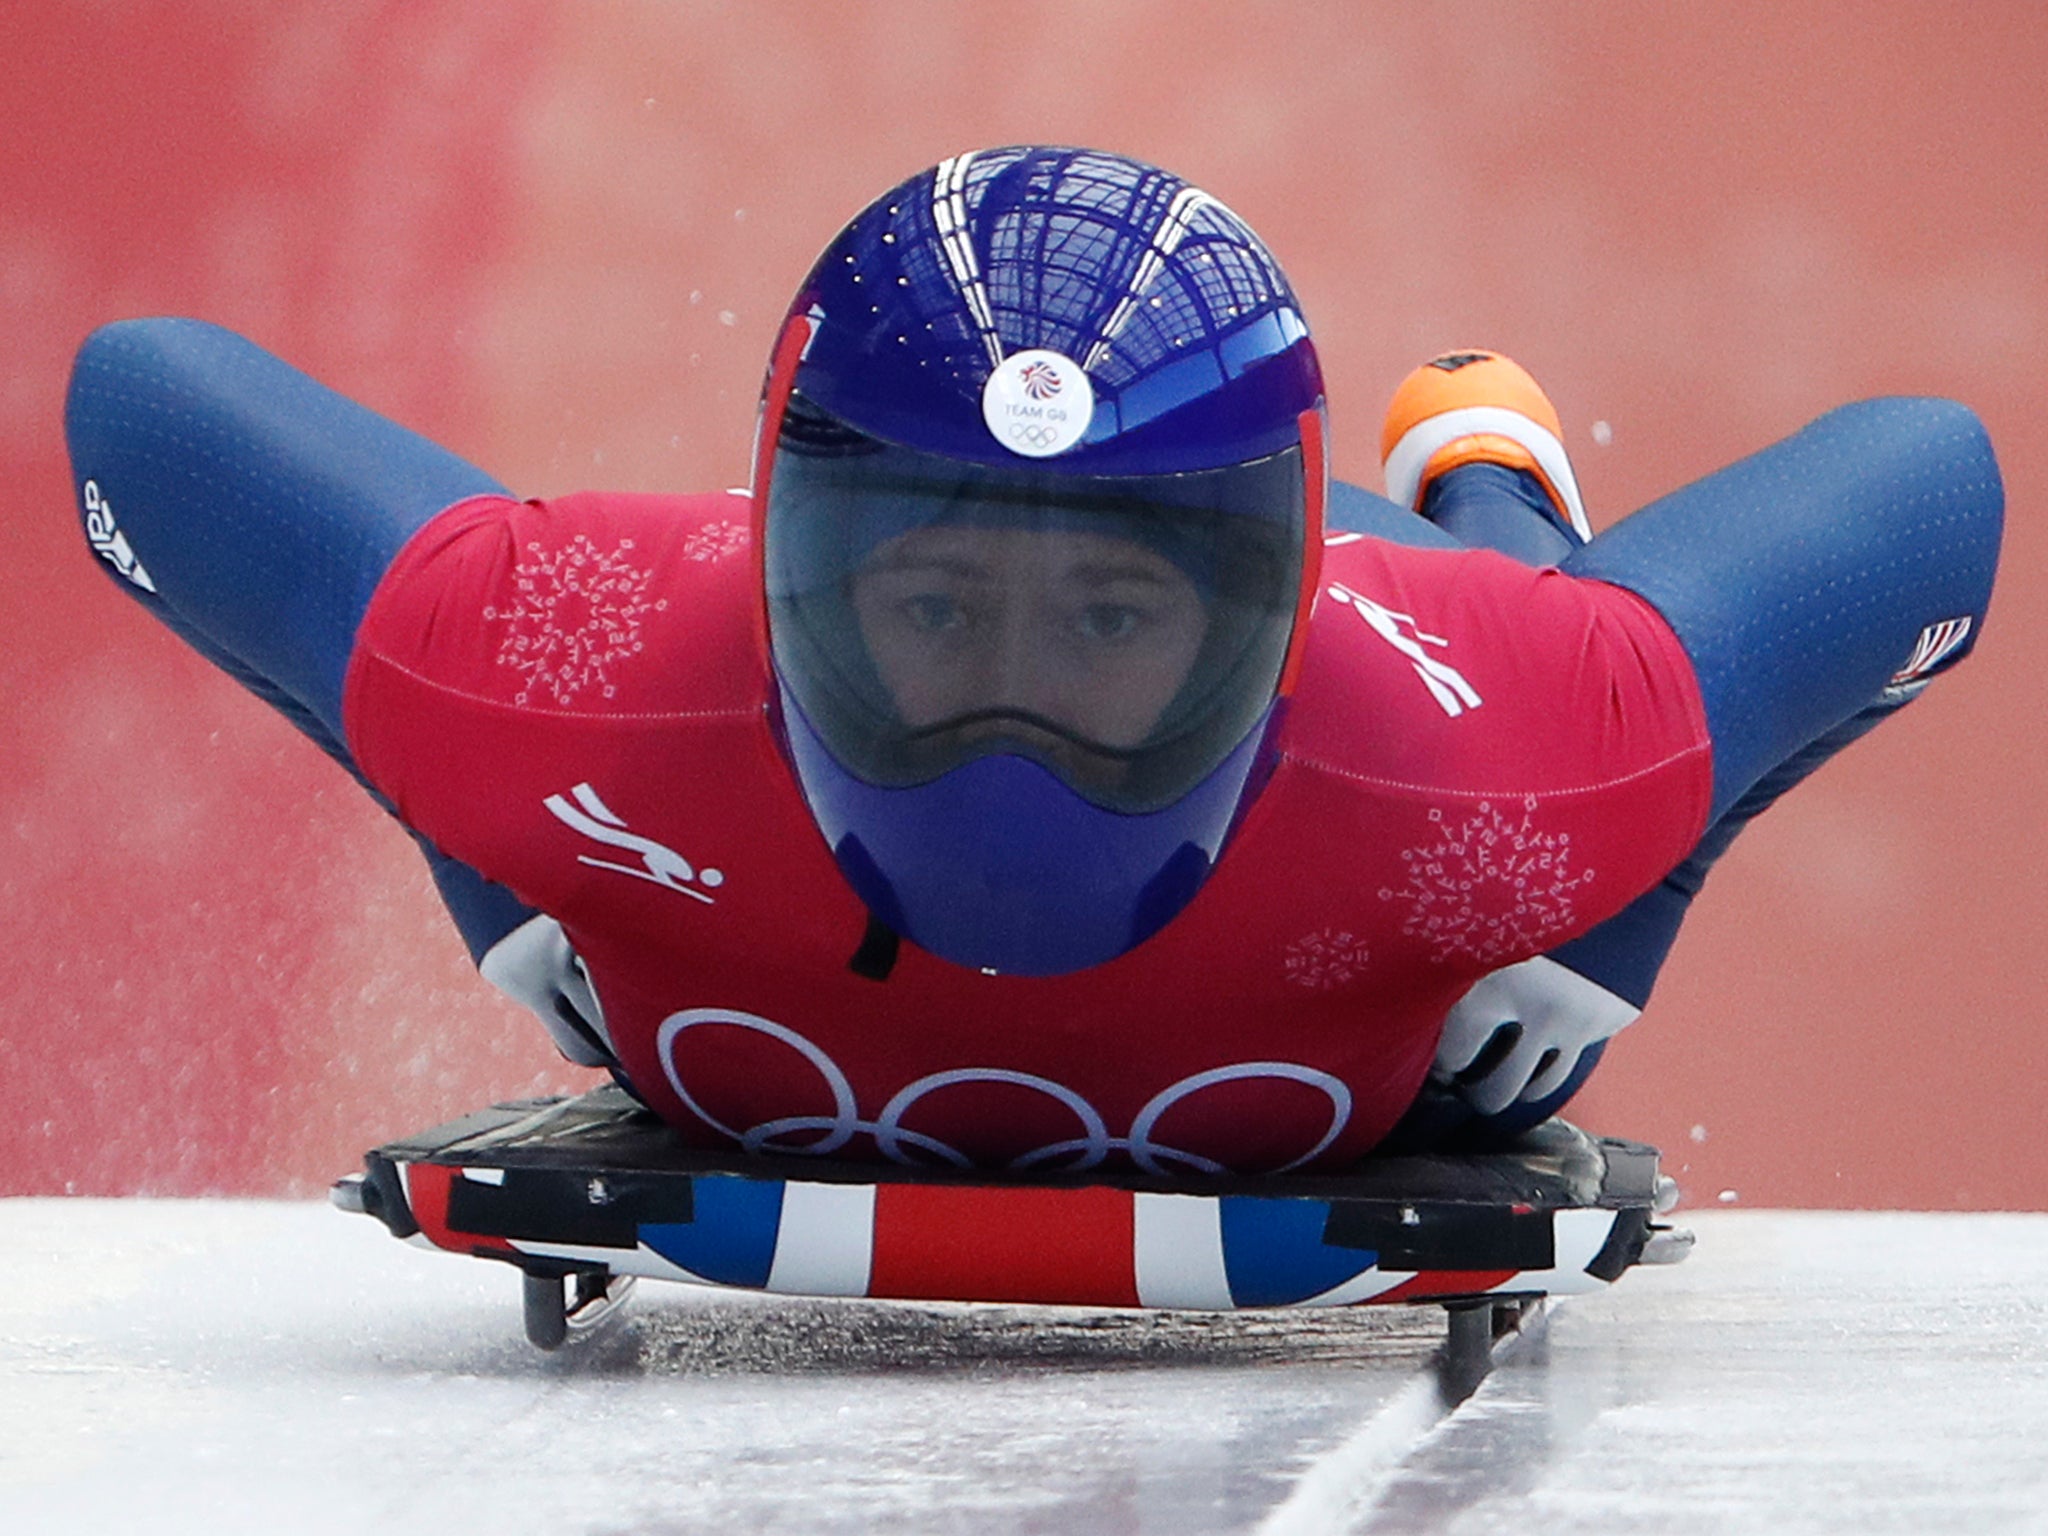 Lizzy Yarnold was quickest on the fourth practice run for the Winter Olympics skeleton competition